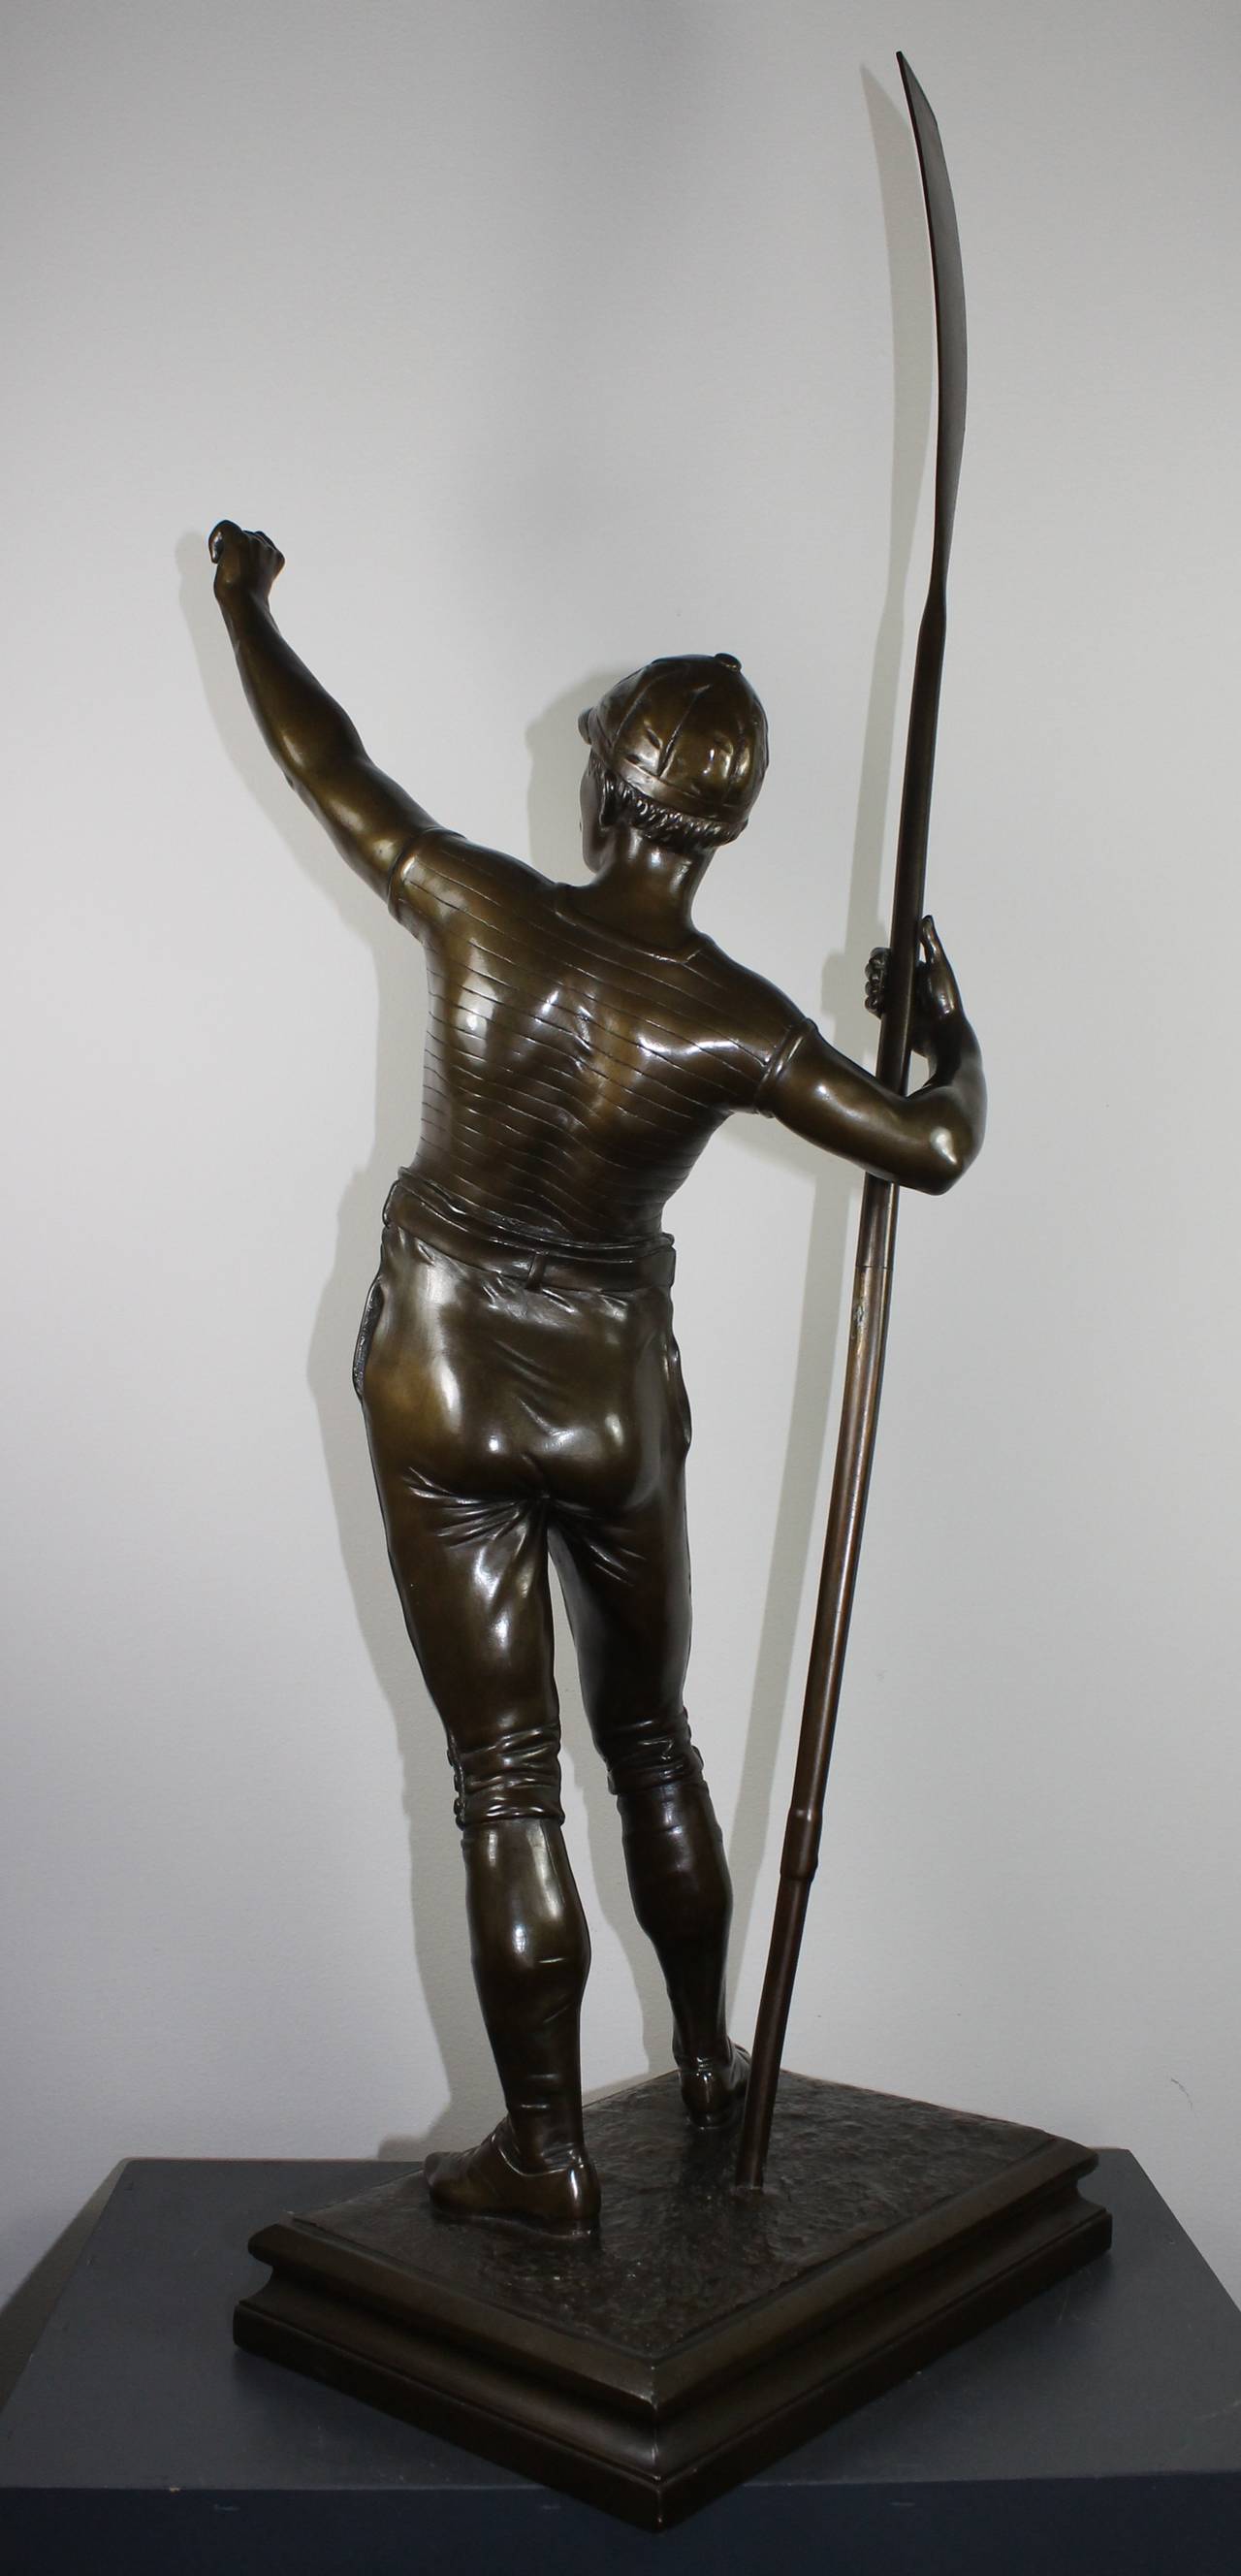 Early 20th Century Bronzed Rower Sculpture, English circa 1910